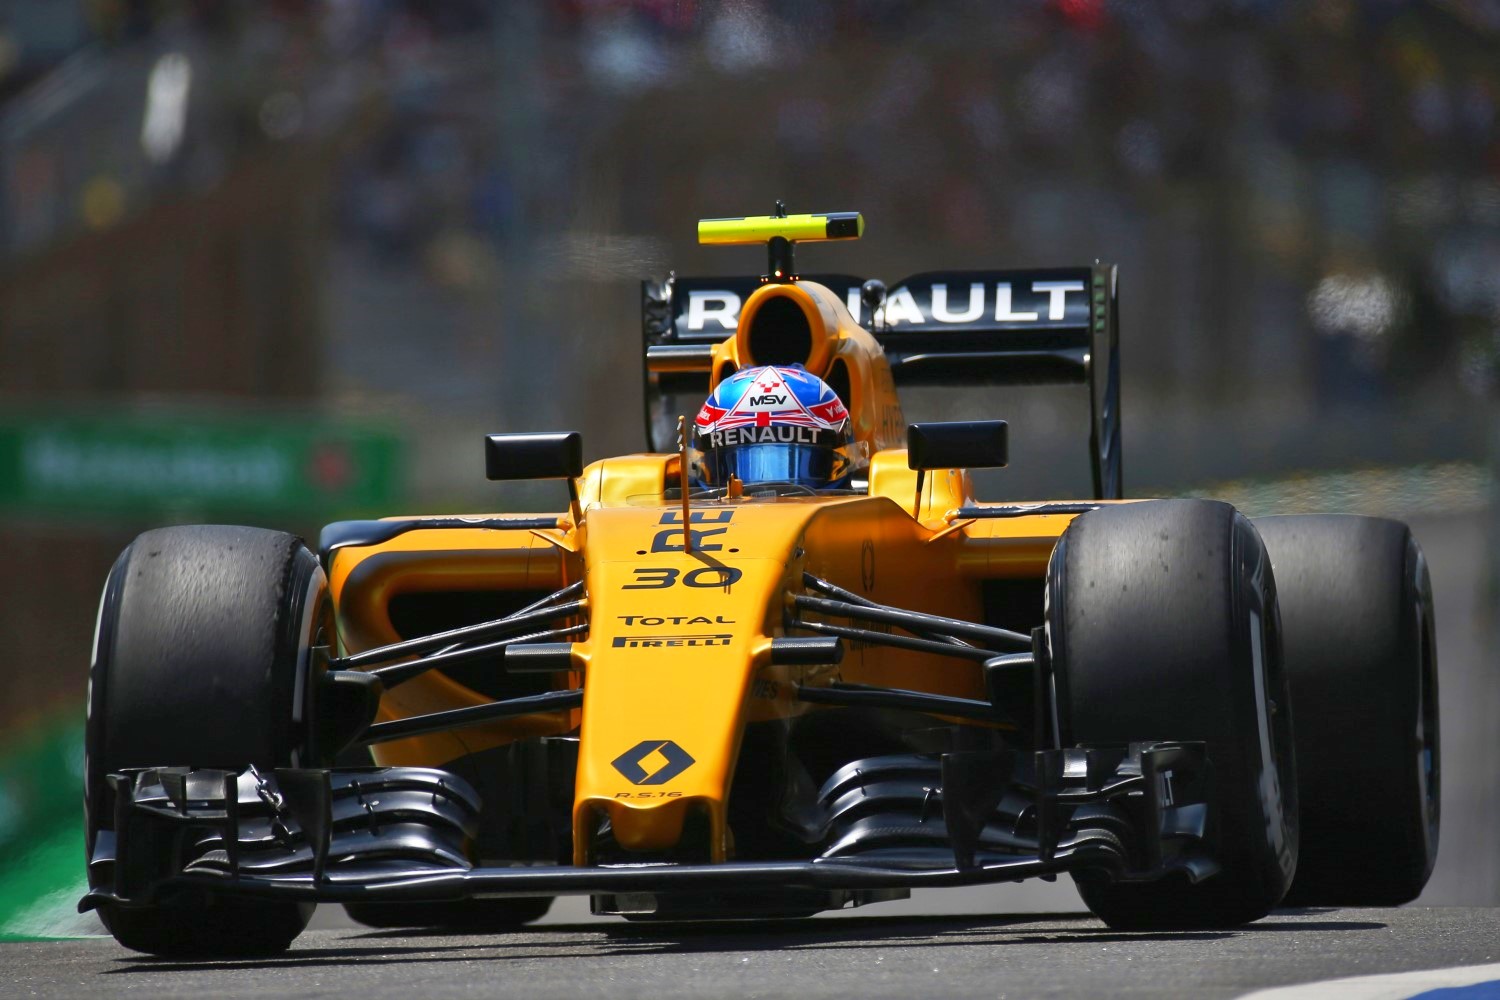 Can Renault really make gains in 2017?